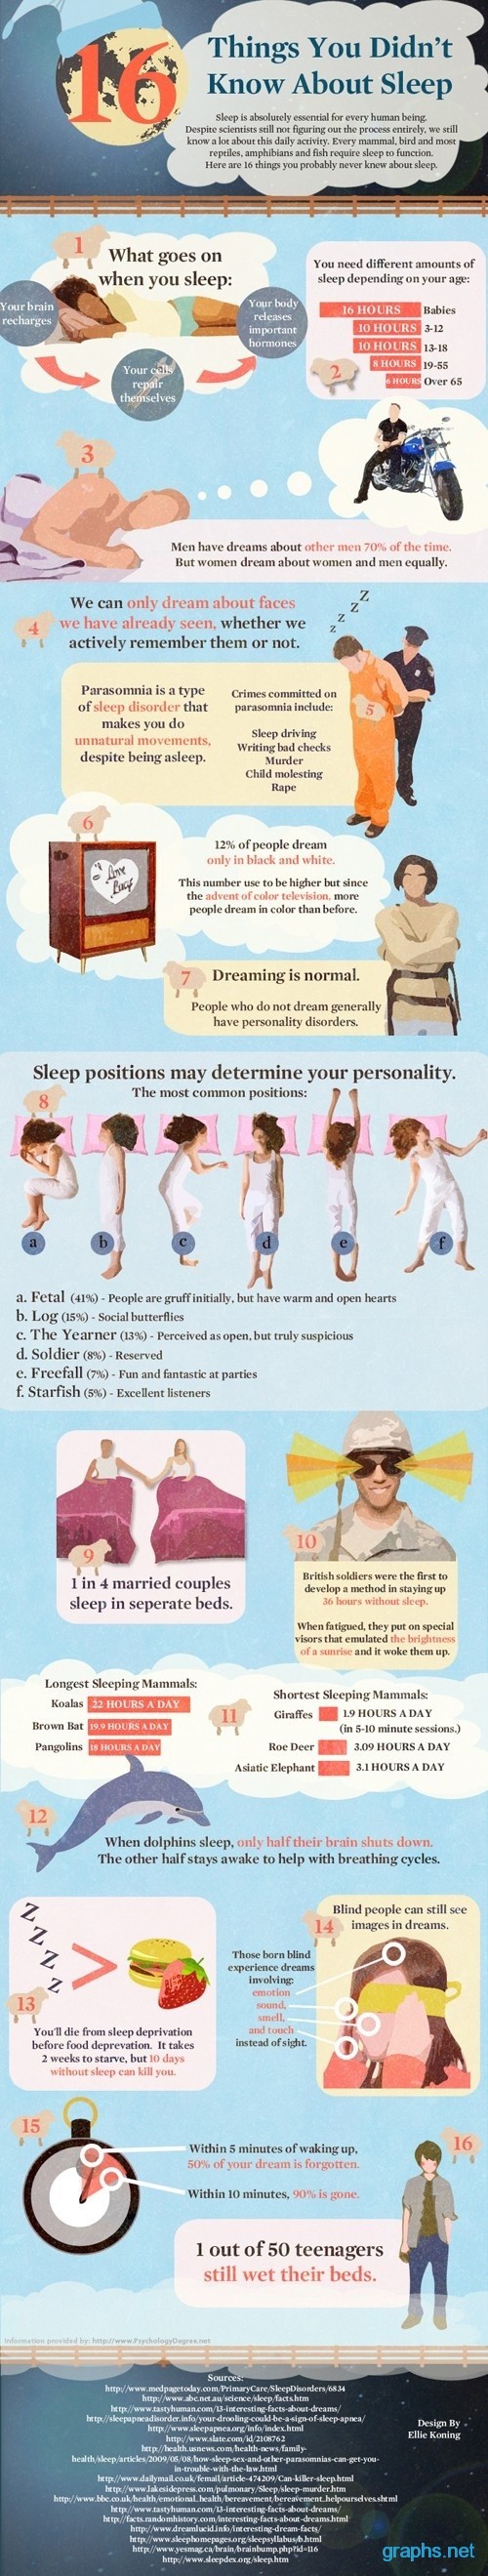 Funny Facts about Sleep